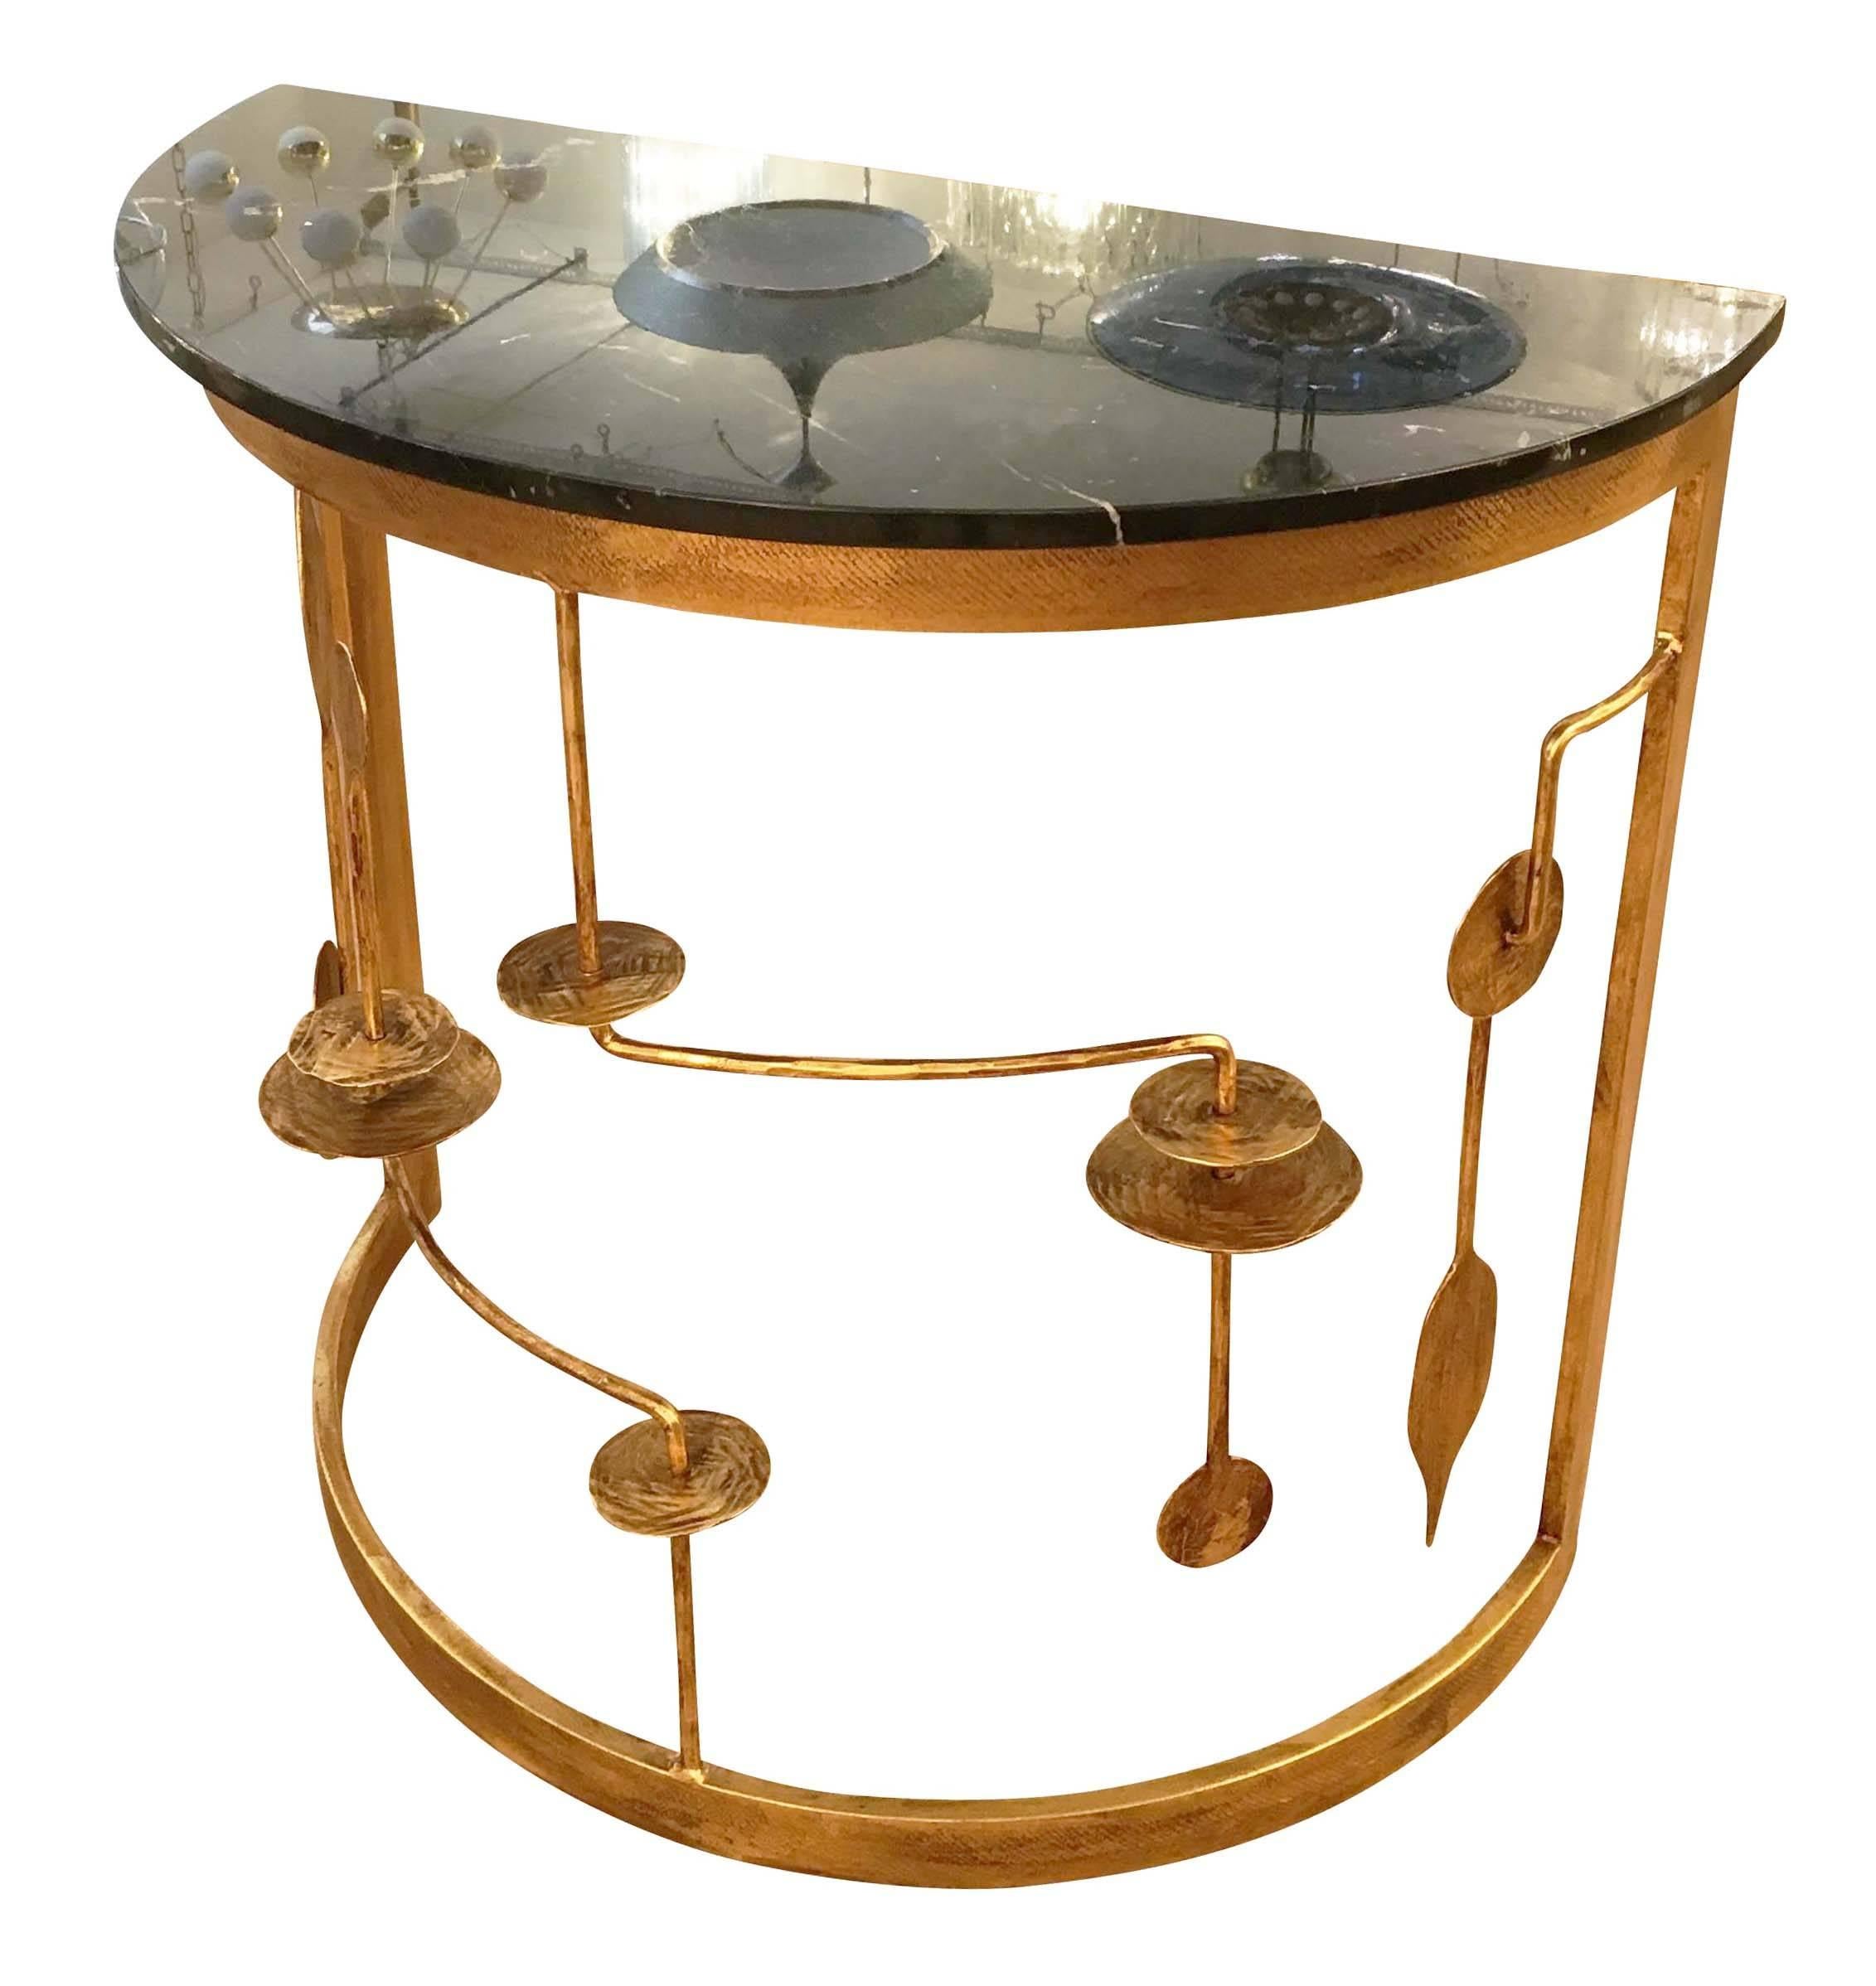 Modern Pair of Gilded Demilune Consoles by Banci